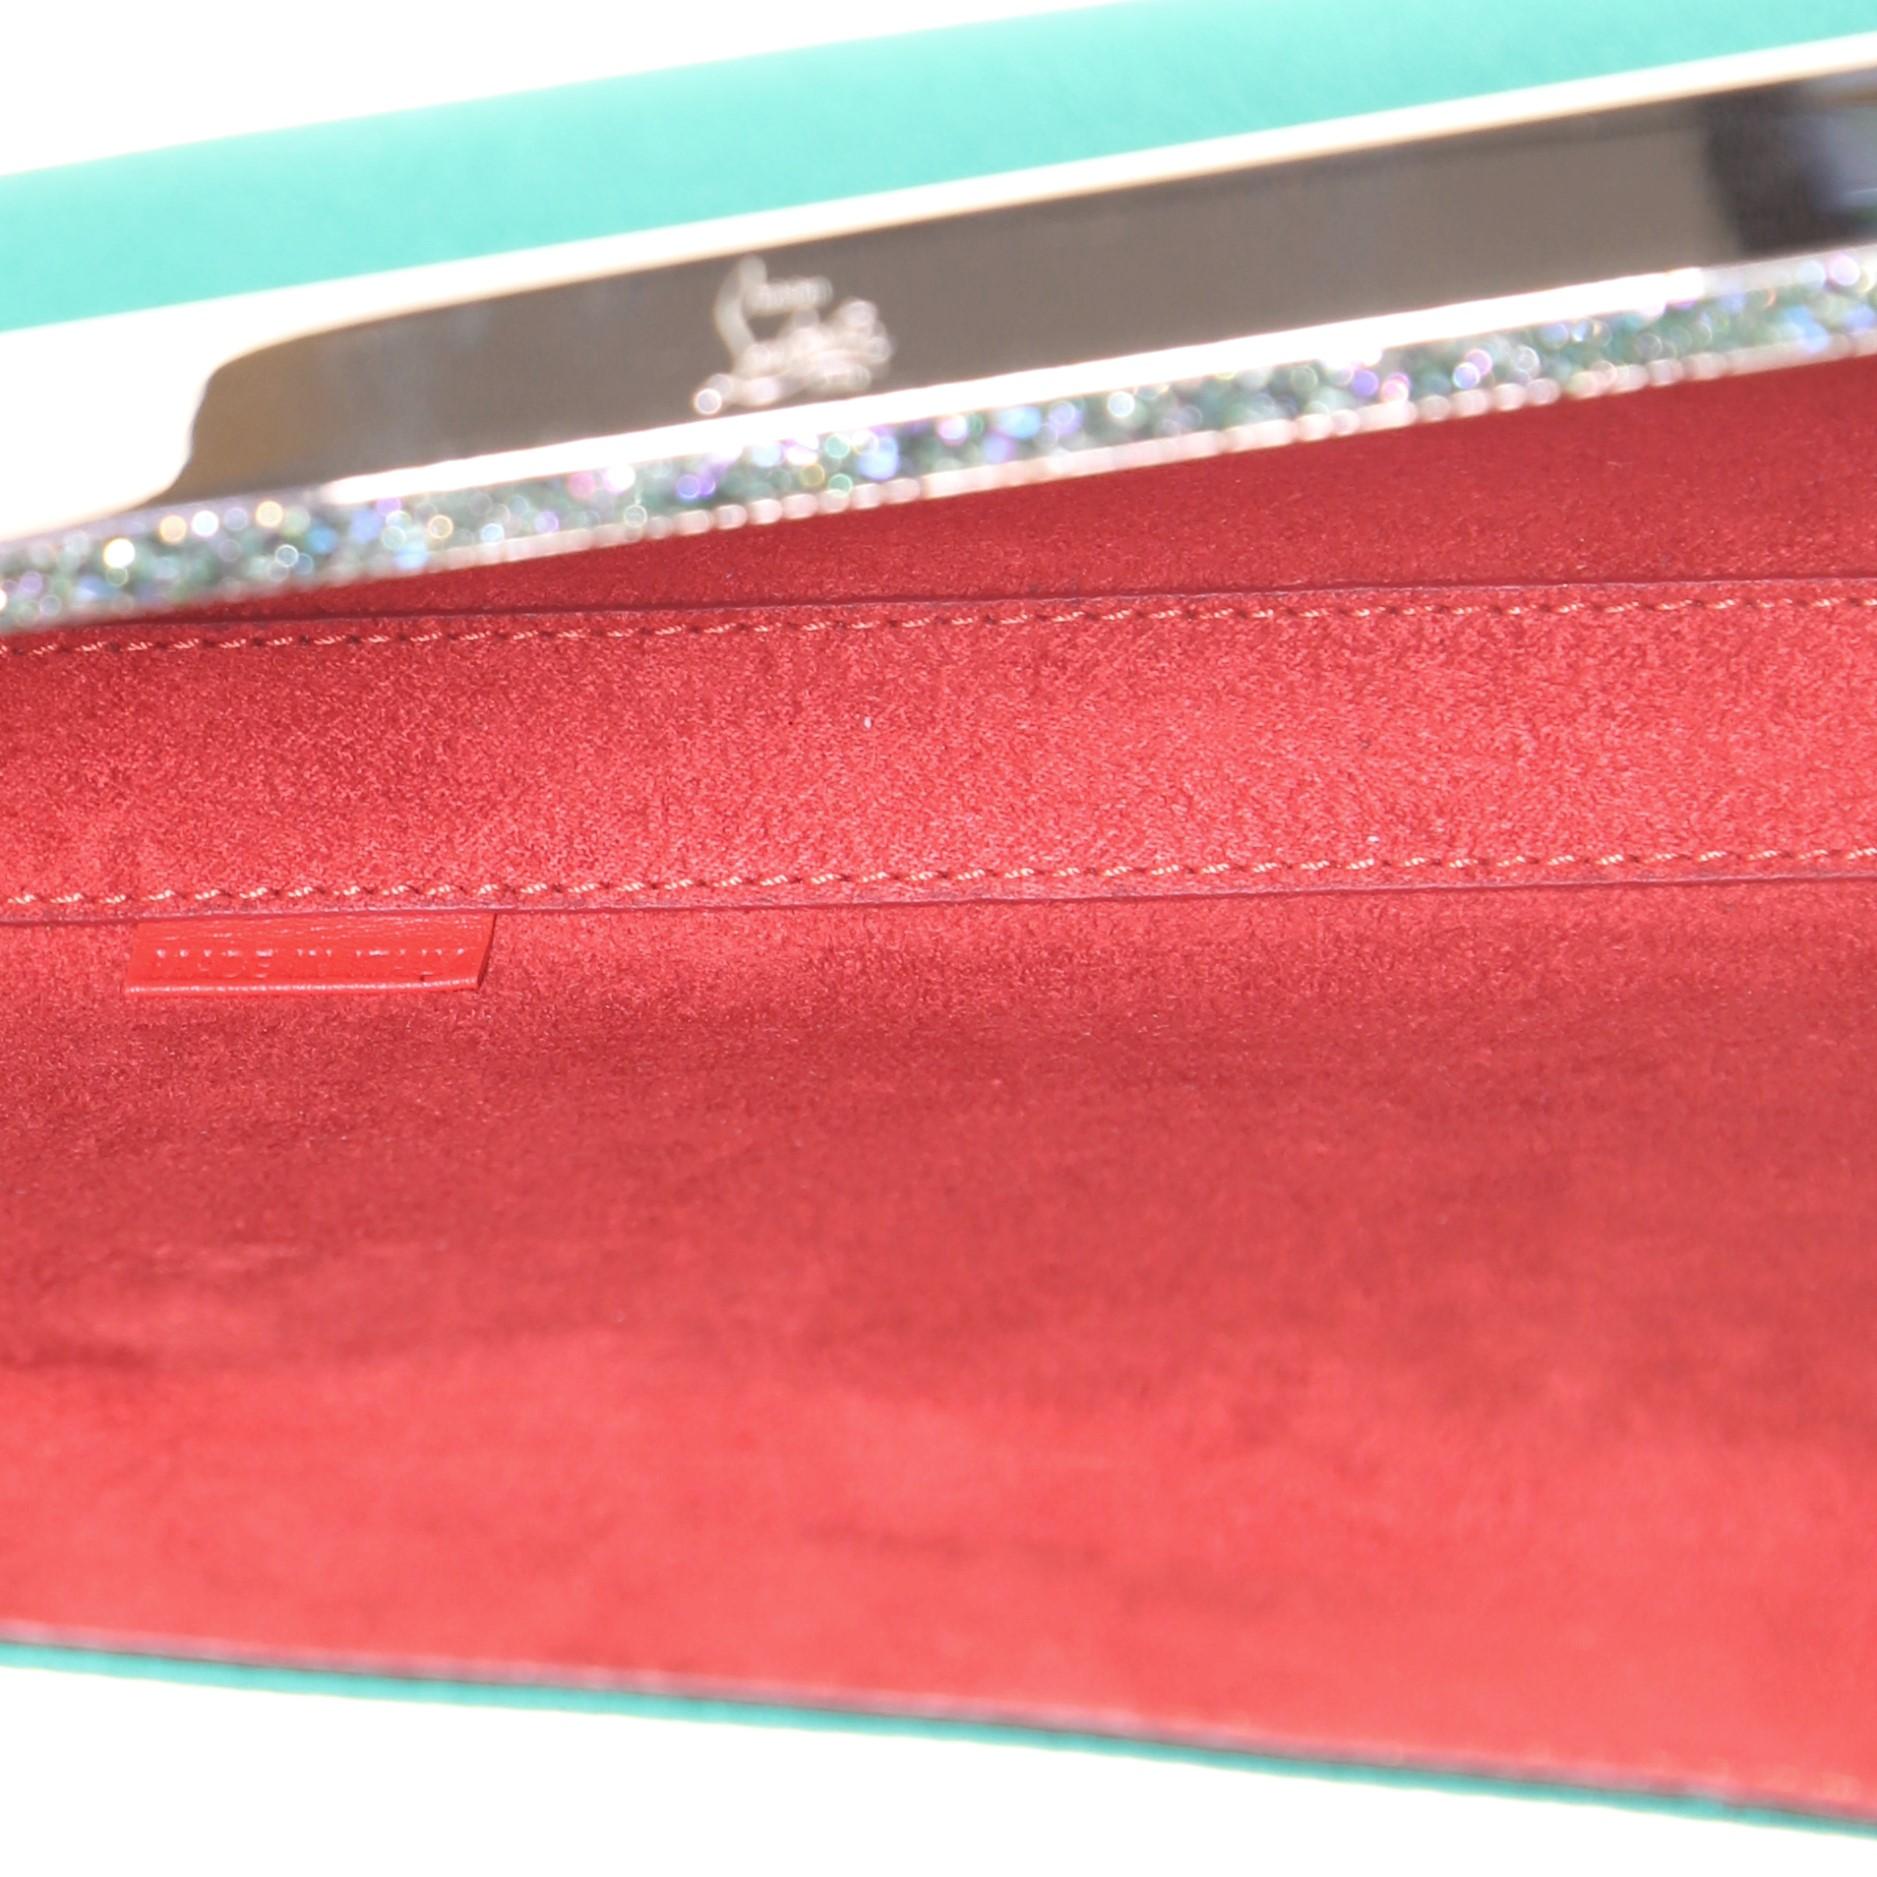 Blue Christian Louboutin Vanite Clutch Satin with Crystals Mini